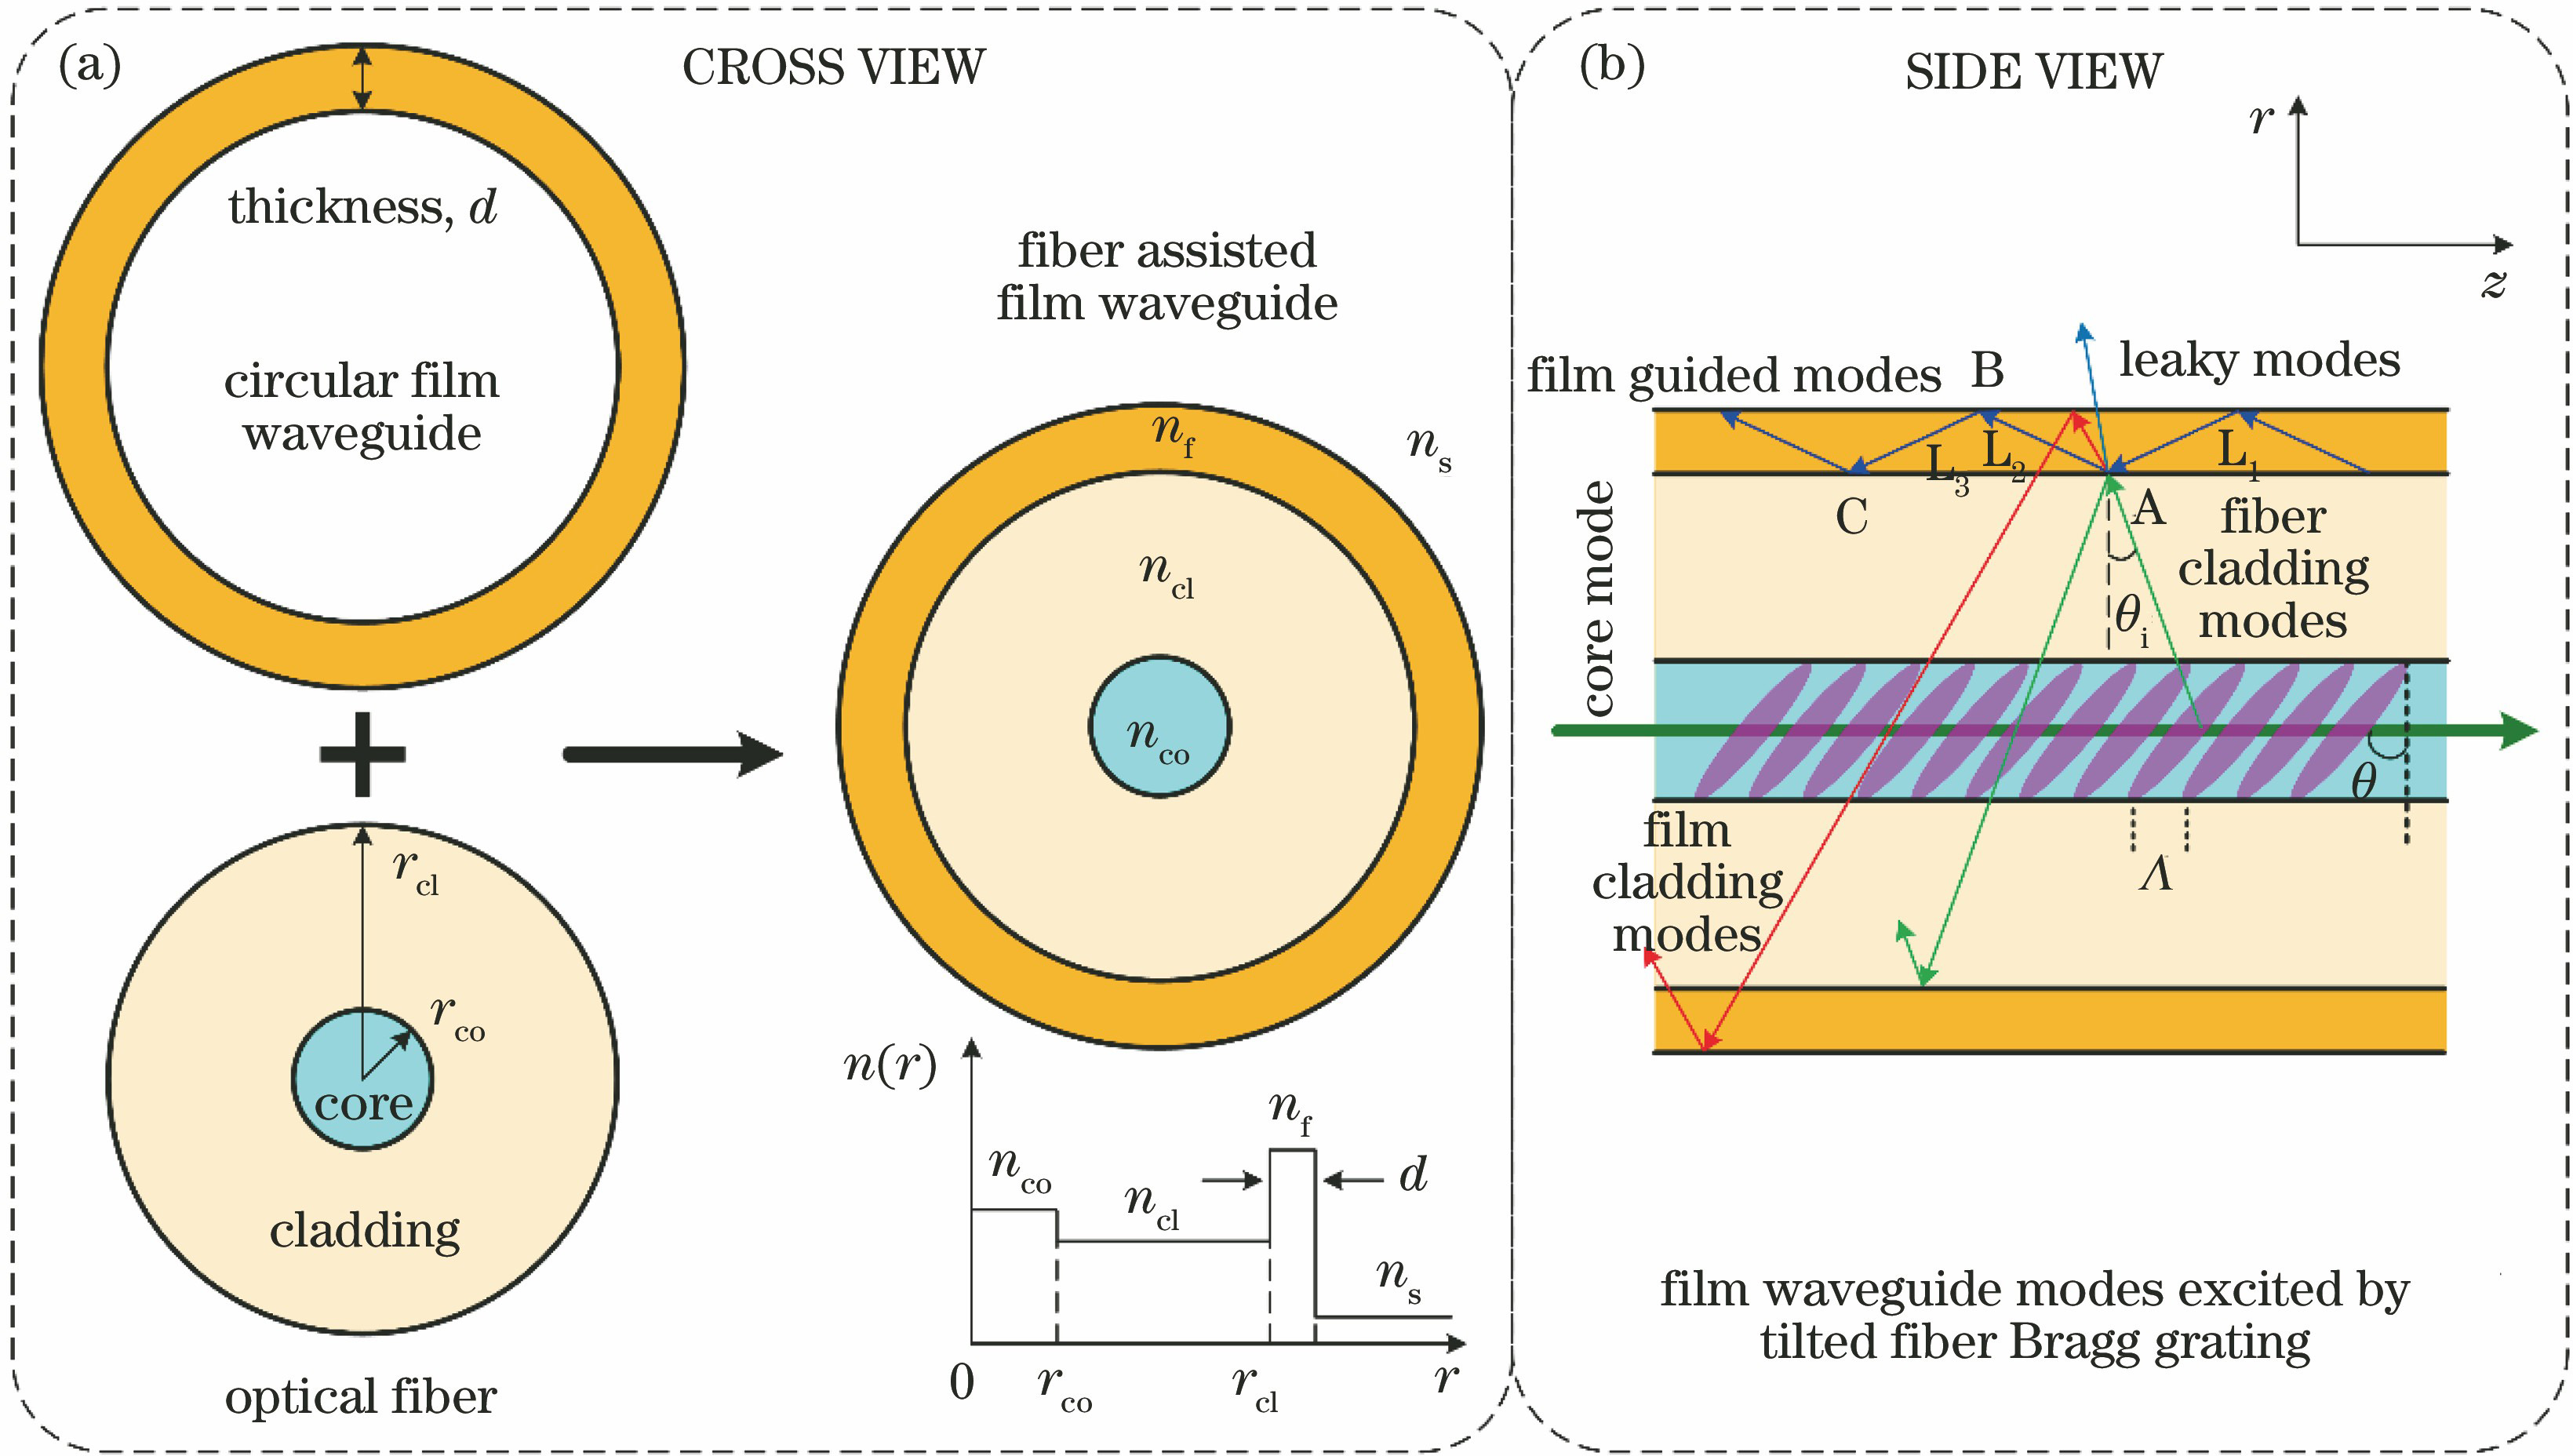 Configuration of optical fiber assisted circular thin film waveguide and generation mechanism of thin film waveguide modes. (a) Cross view, optical fiber assisted circular thin film waveguide and refractive index distribution; (b) side view, mode coupling principle of thin film waveguide mode excited by TFBG